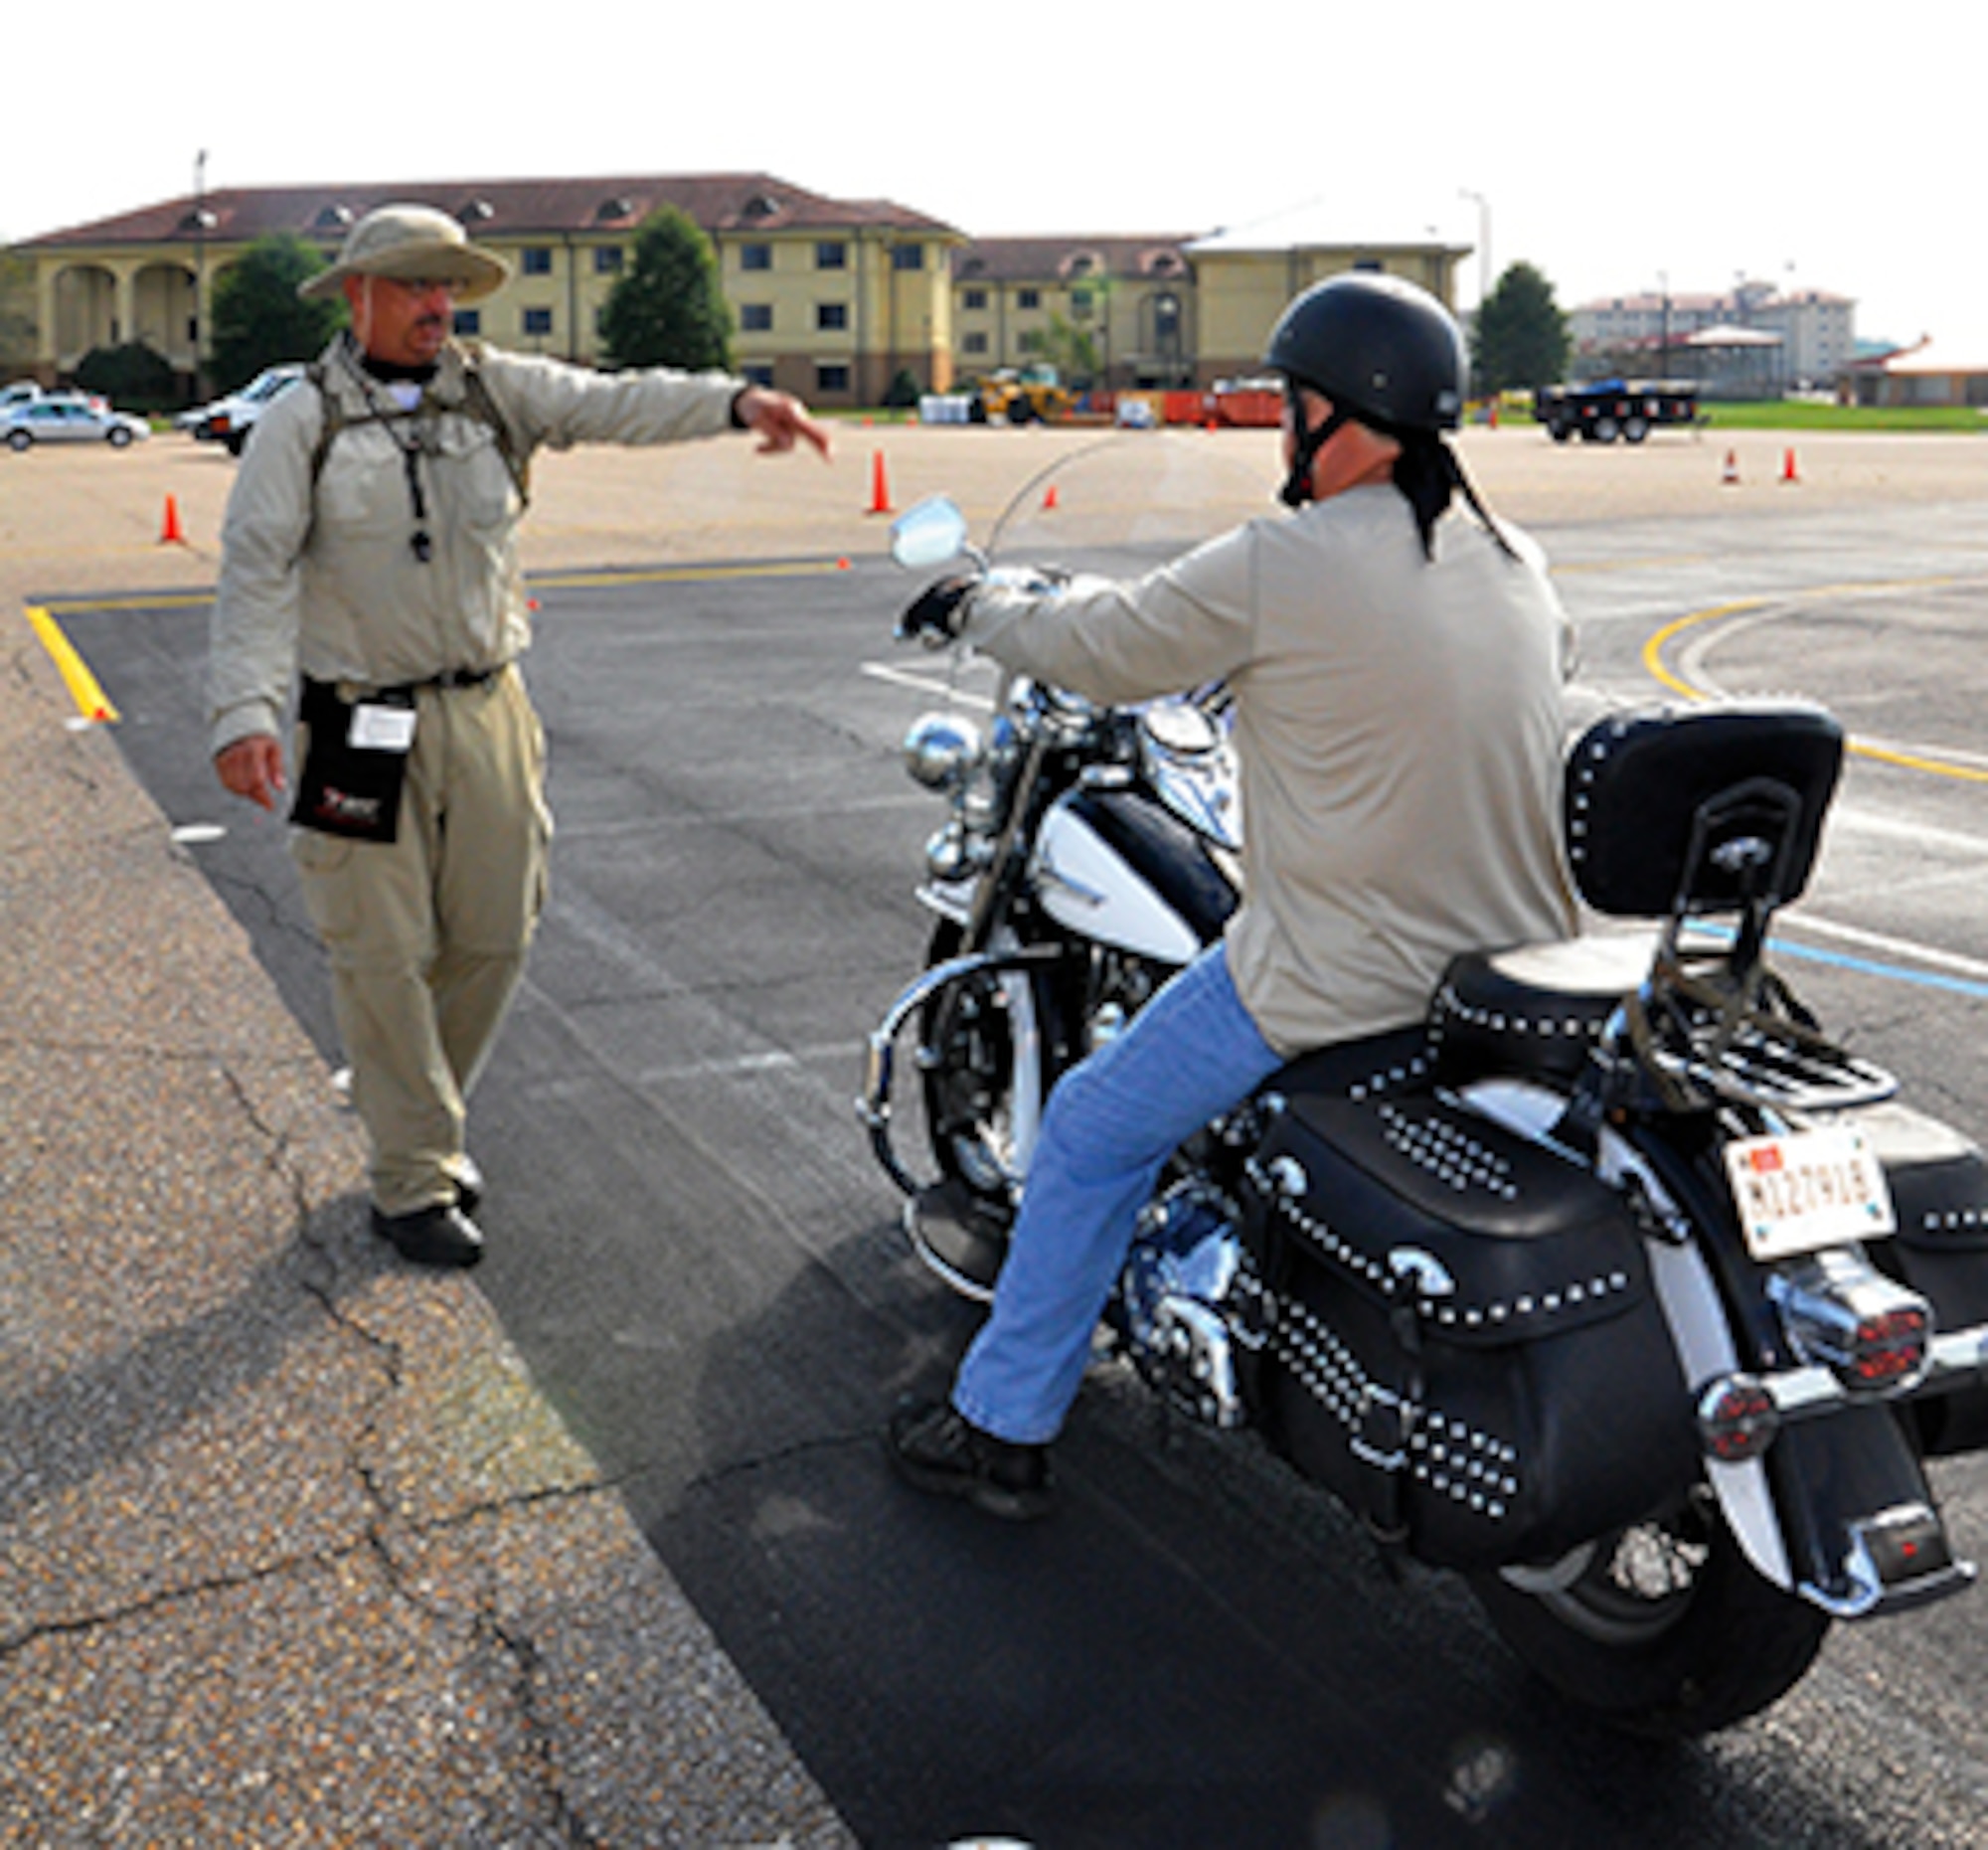 The 908th Airlift Wing will host a motorcycle safety course during the June UTA.